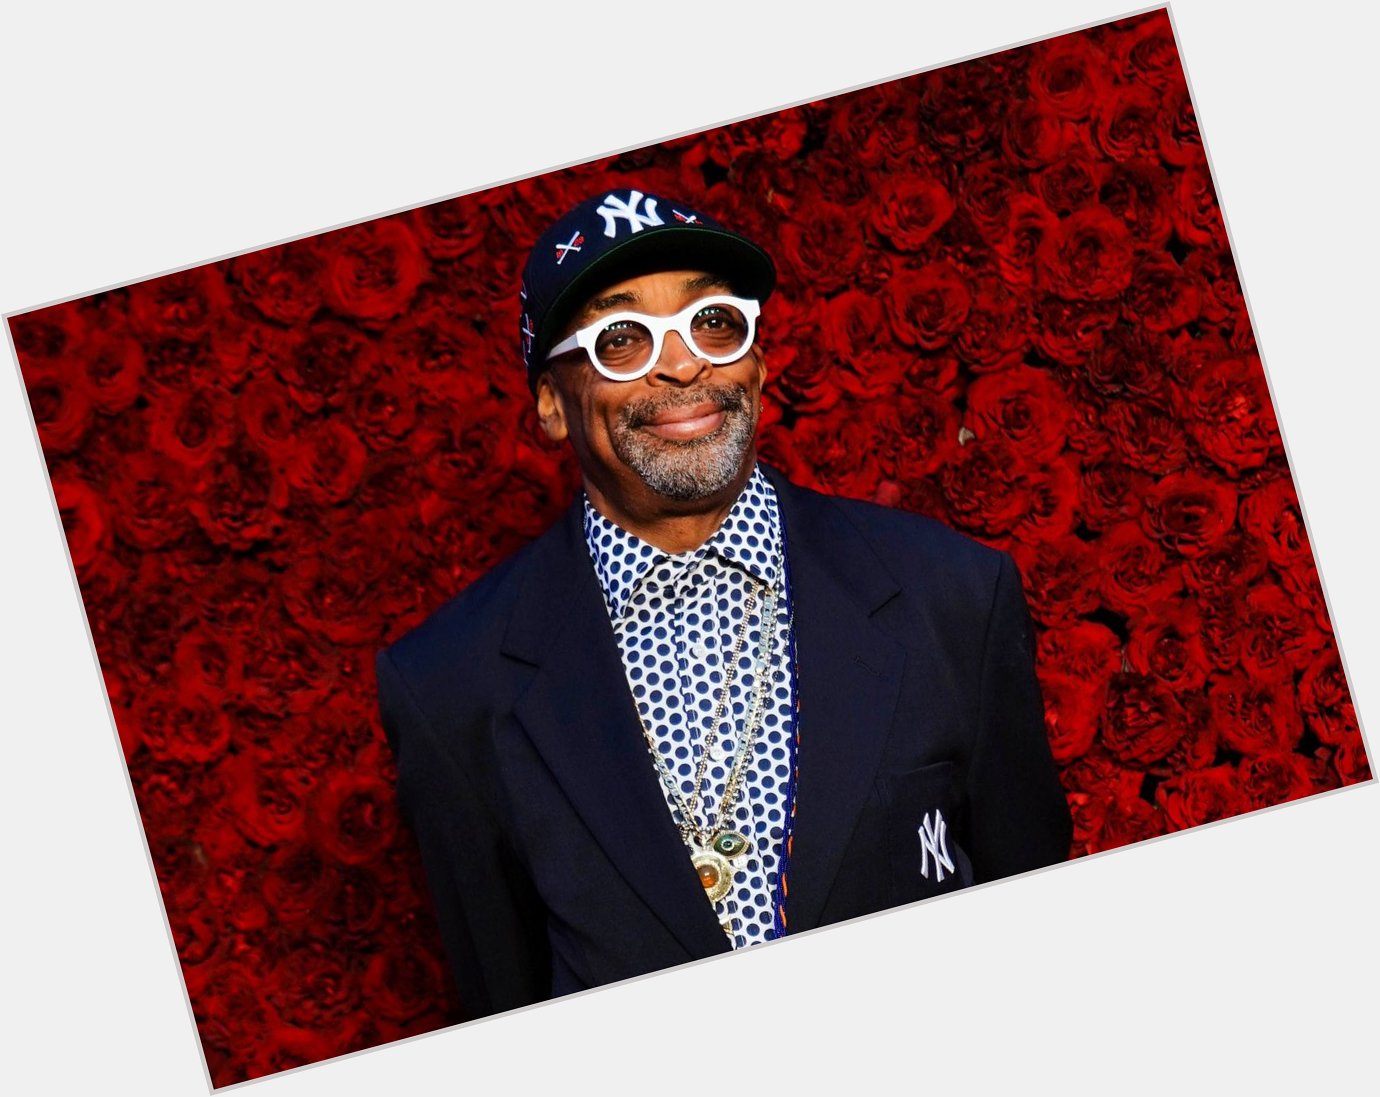 Wishing a happy birthday to the incomparable Spike Lee. 